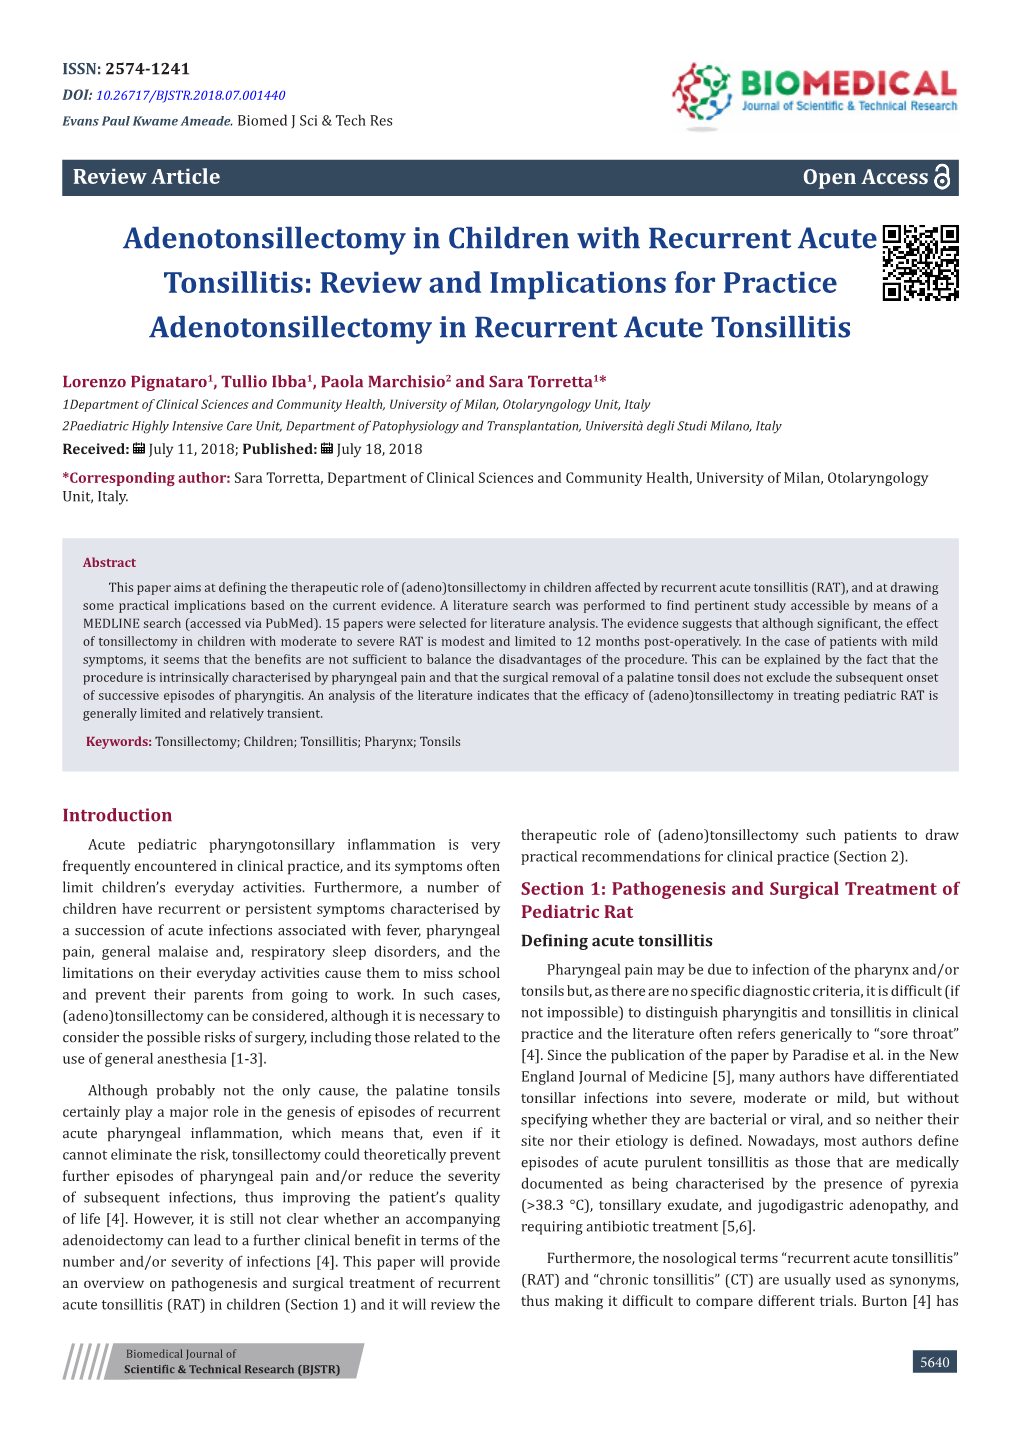 Adenotonsillectomy in Children with Recurrent Acute Tonsillitis: Review and Implications for Practice Adenotonsillectomy in Recurrent Acute Tonsillitis